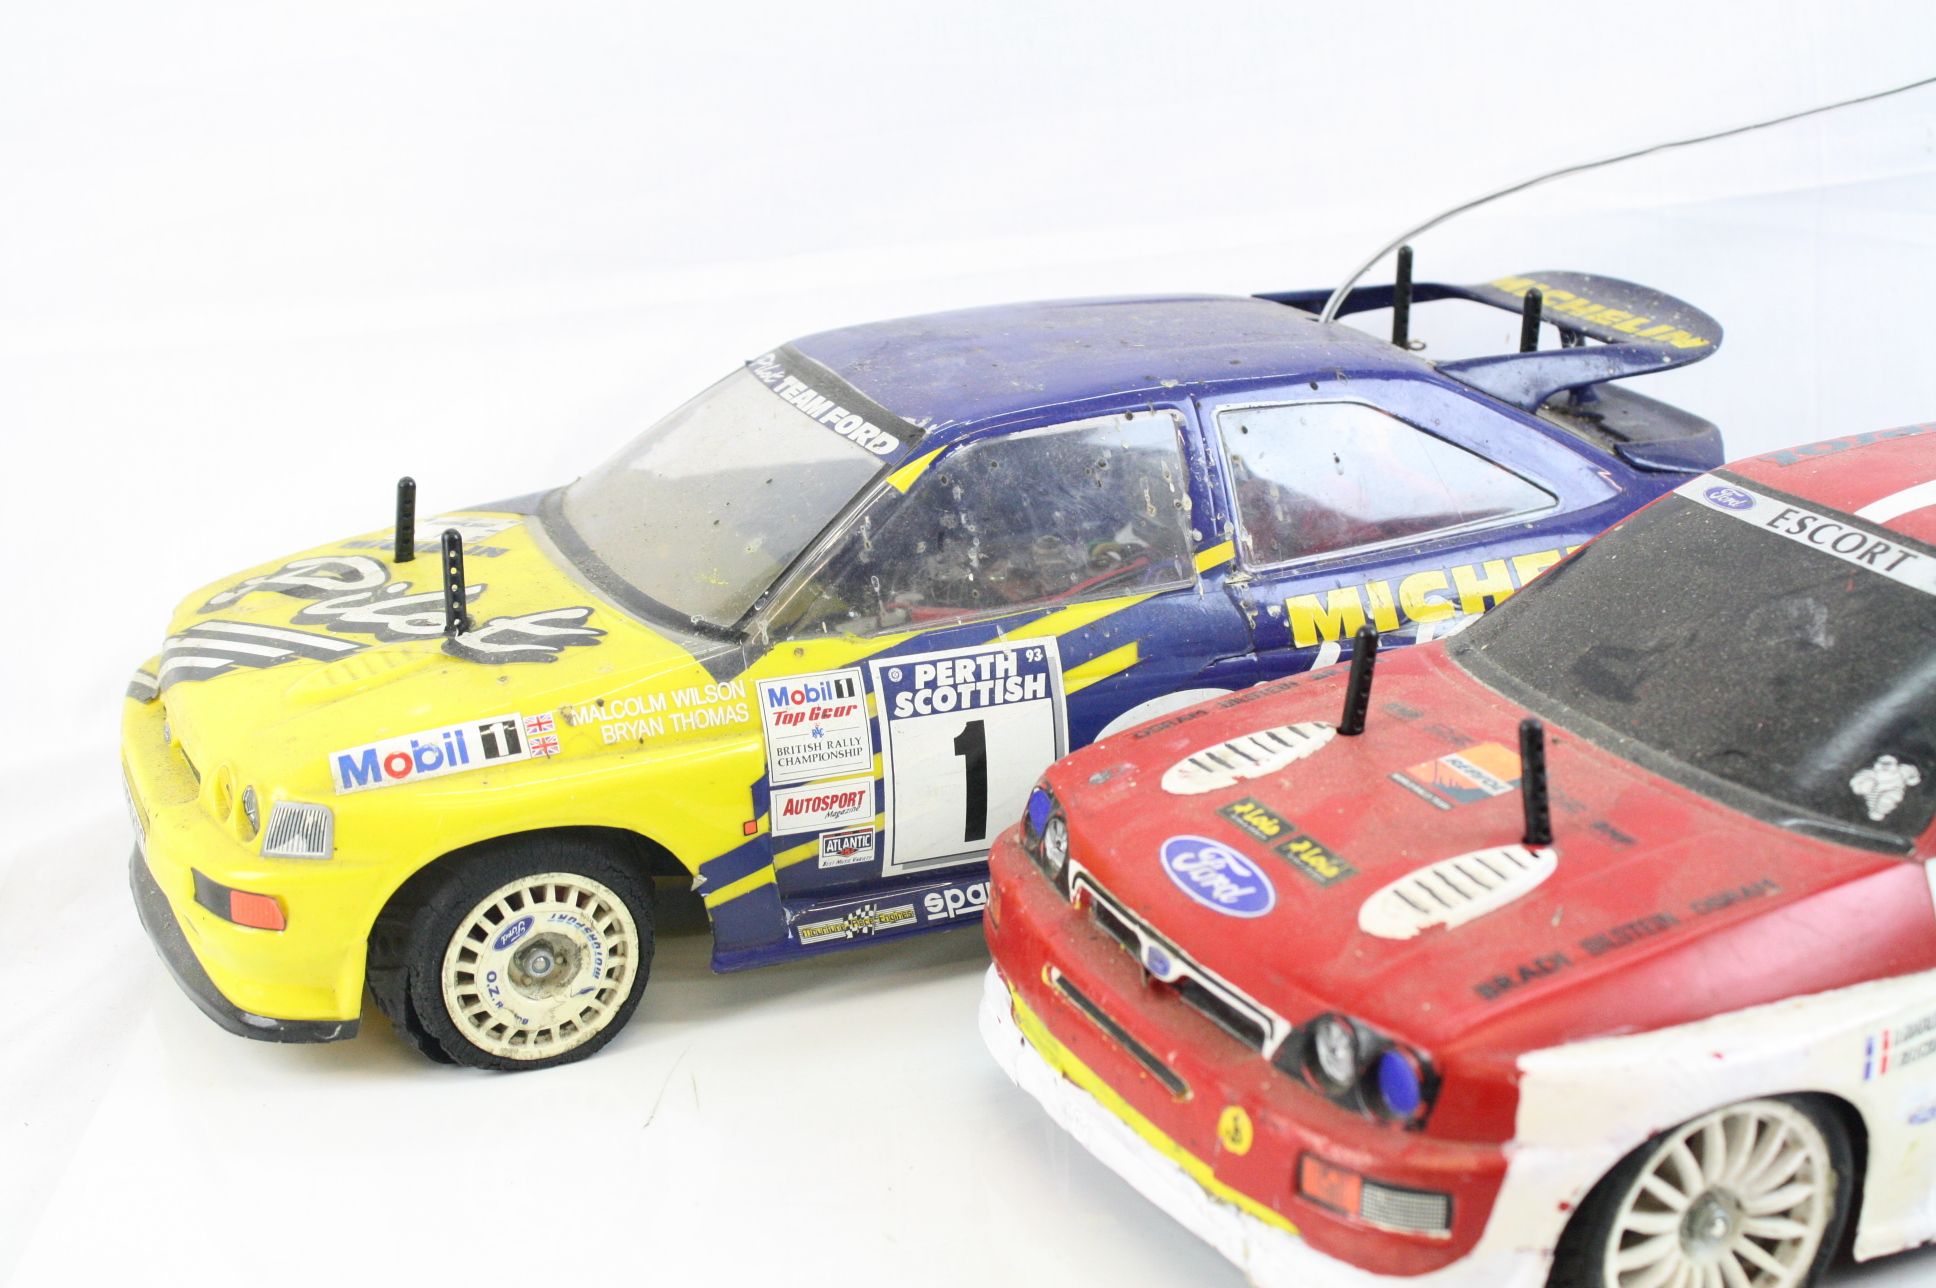 A Tamiya 58125 Ford Escort RS Michelin Pilot with TA01 chassis together with a Tamiya Ford Escort RS - Image 3 of 5